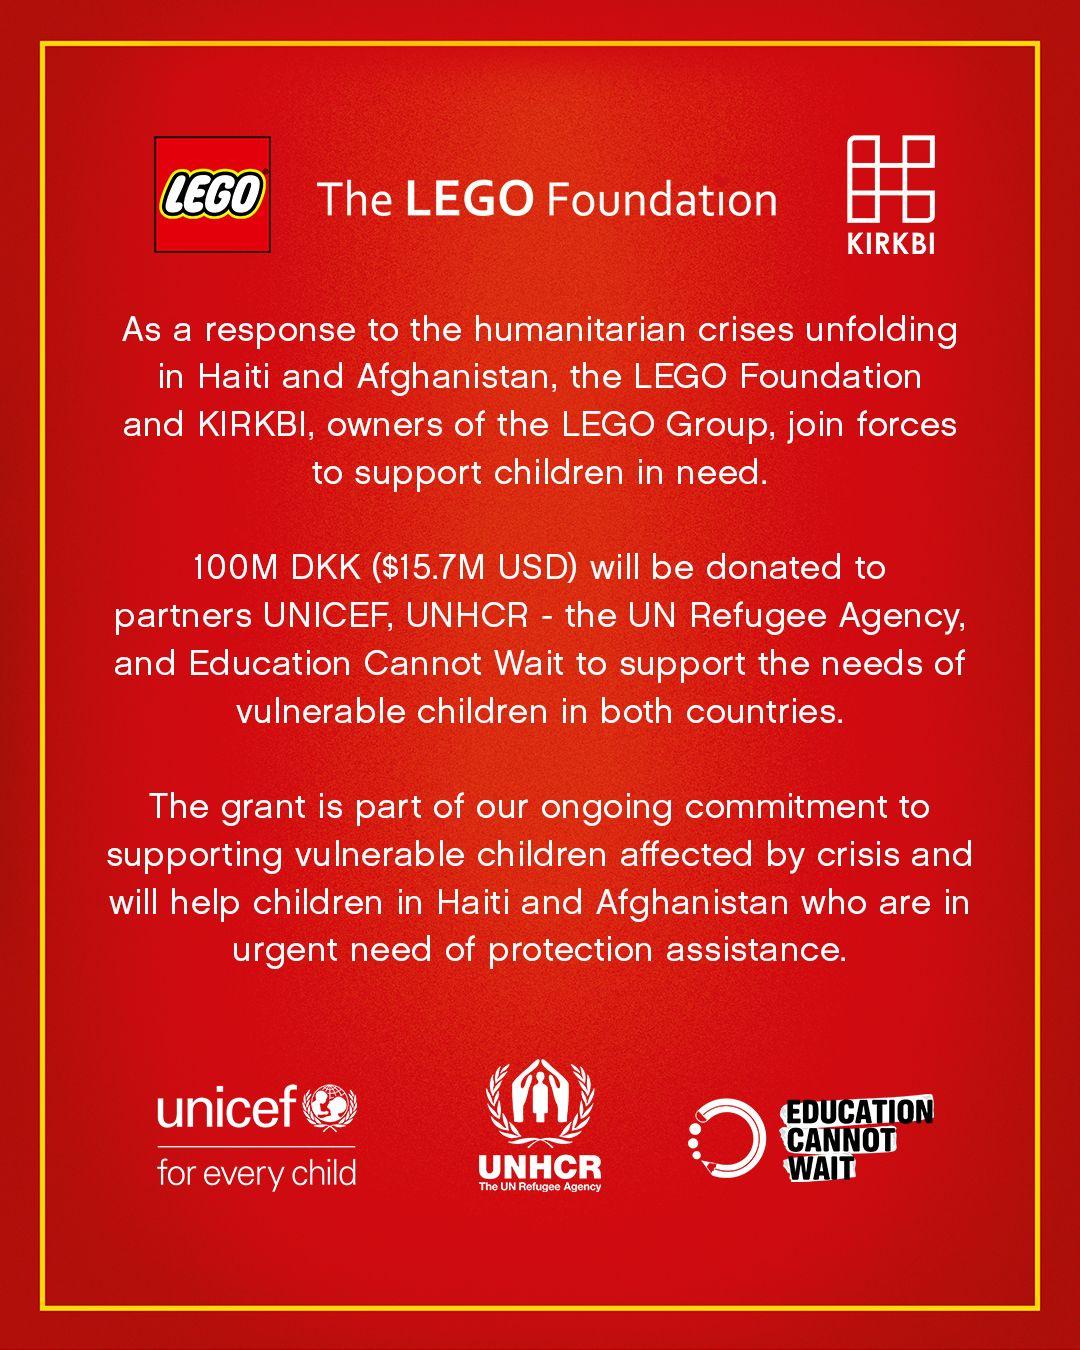 LEGO Foundation donates over 13 million euros for children from Afghanistan and Haiti